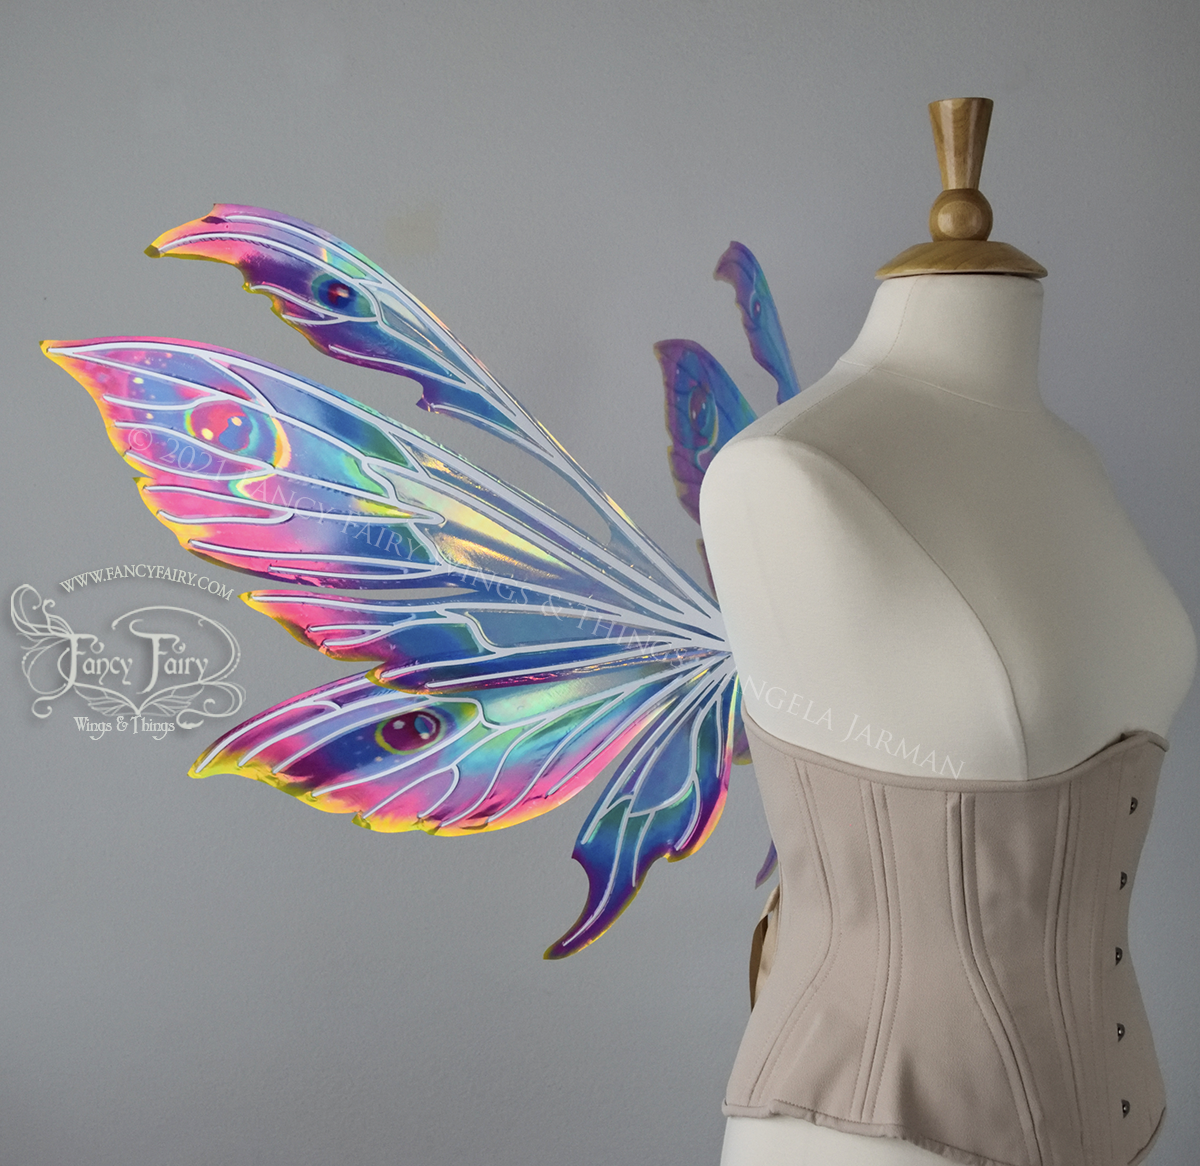 Aynia "Electric Rainbow" Painted Convertible Iridescent Fairy Wings with White Veins